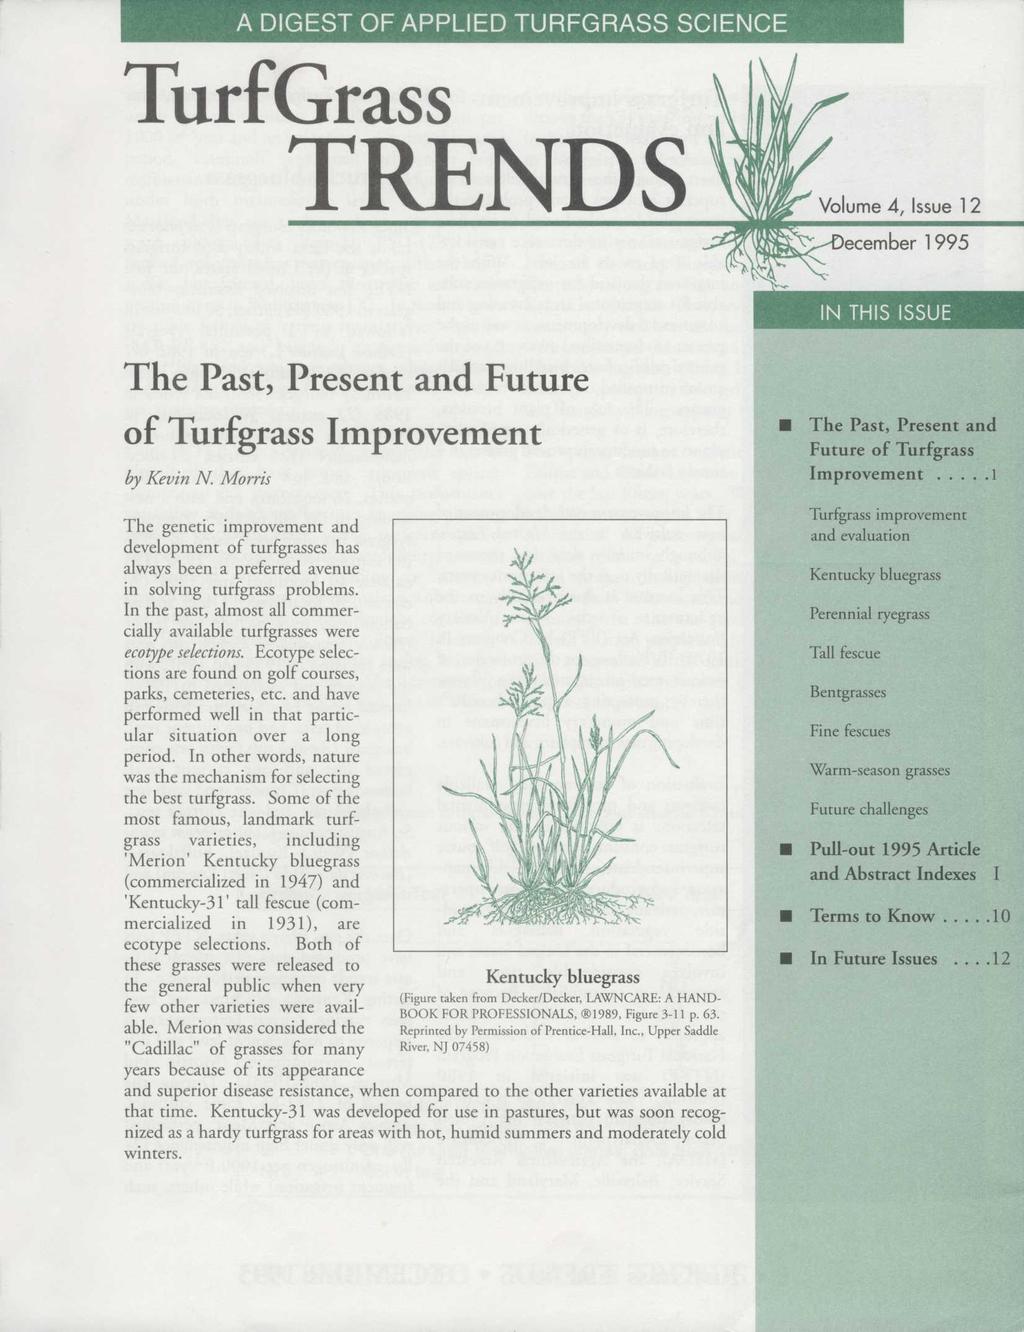 A DIGEST OF APPLIED TURFGRASS SCIENCE TurfGrass TRENDS Volume 4, Issue 12 ecember 1995 IN THIS ISSUE The Past, Present and Future of Turfgrass Improvement by Kevin N.